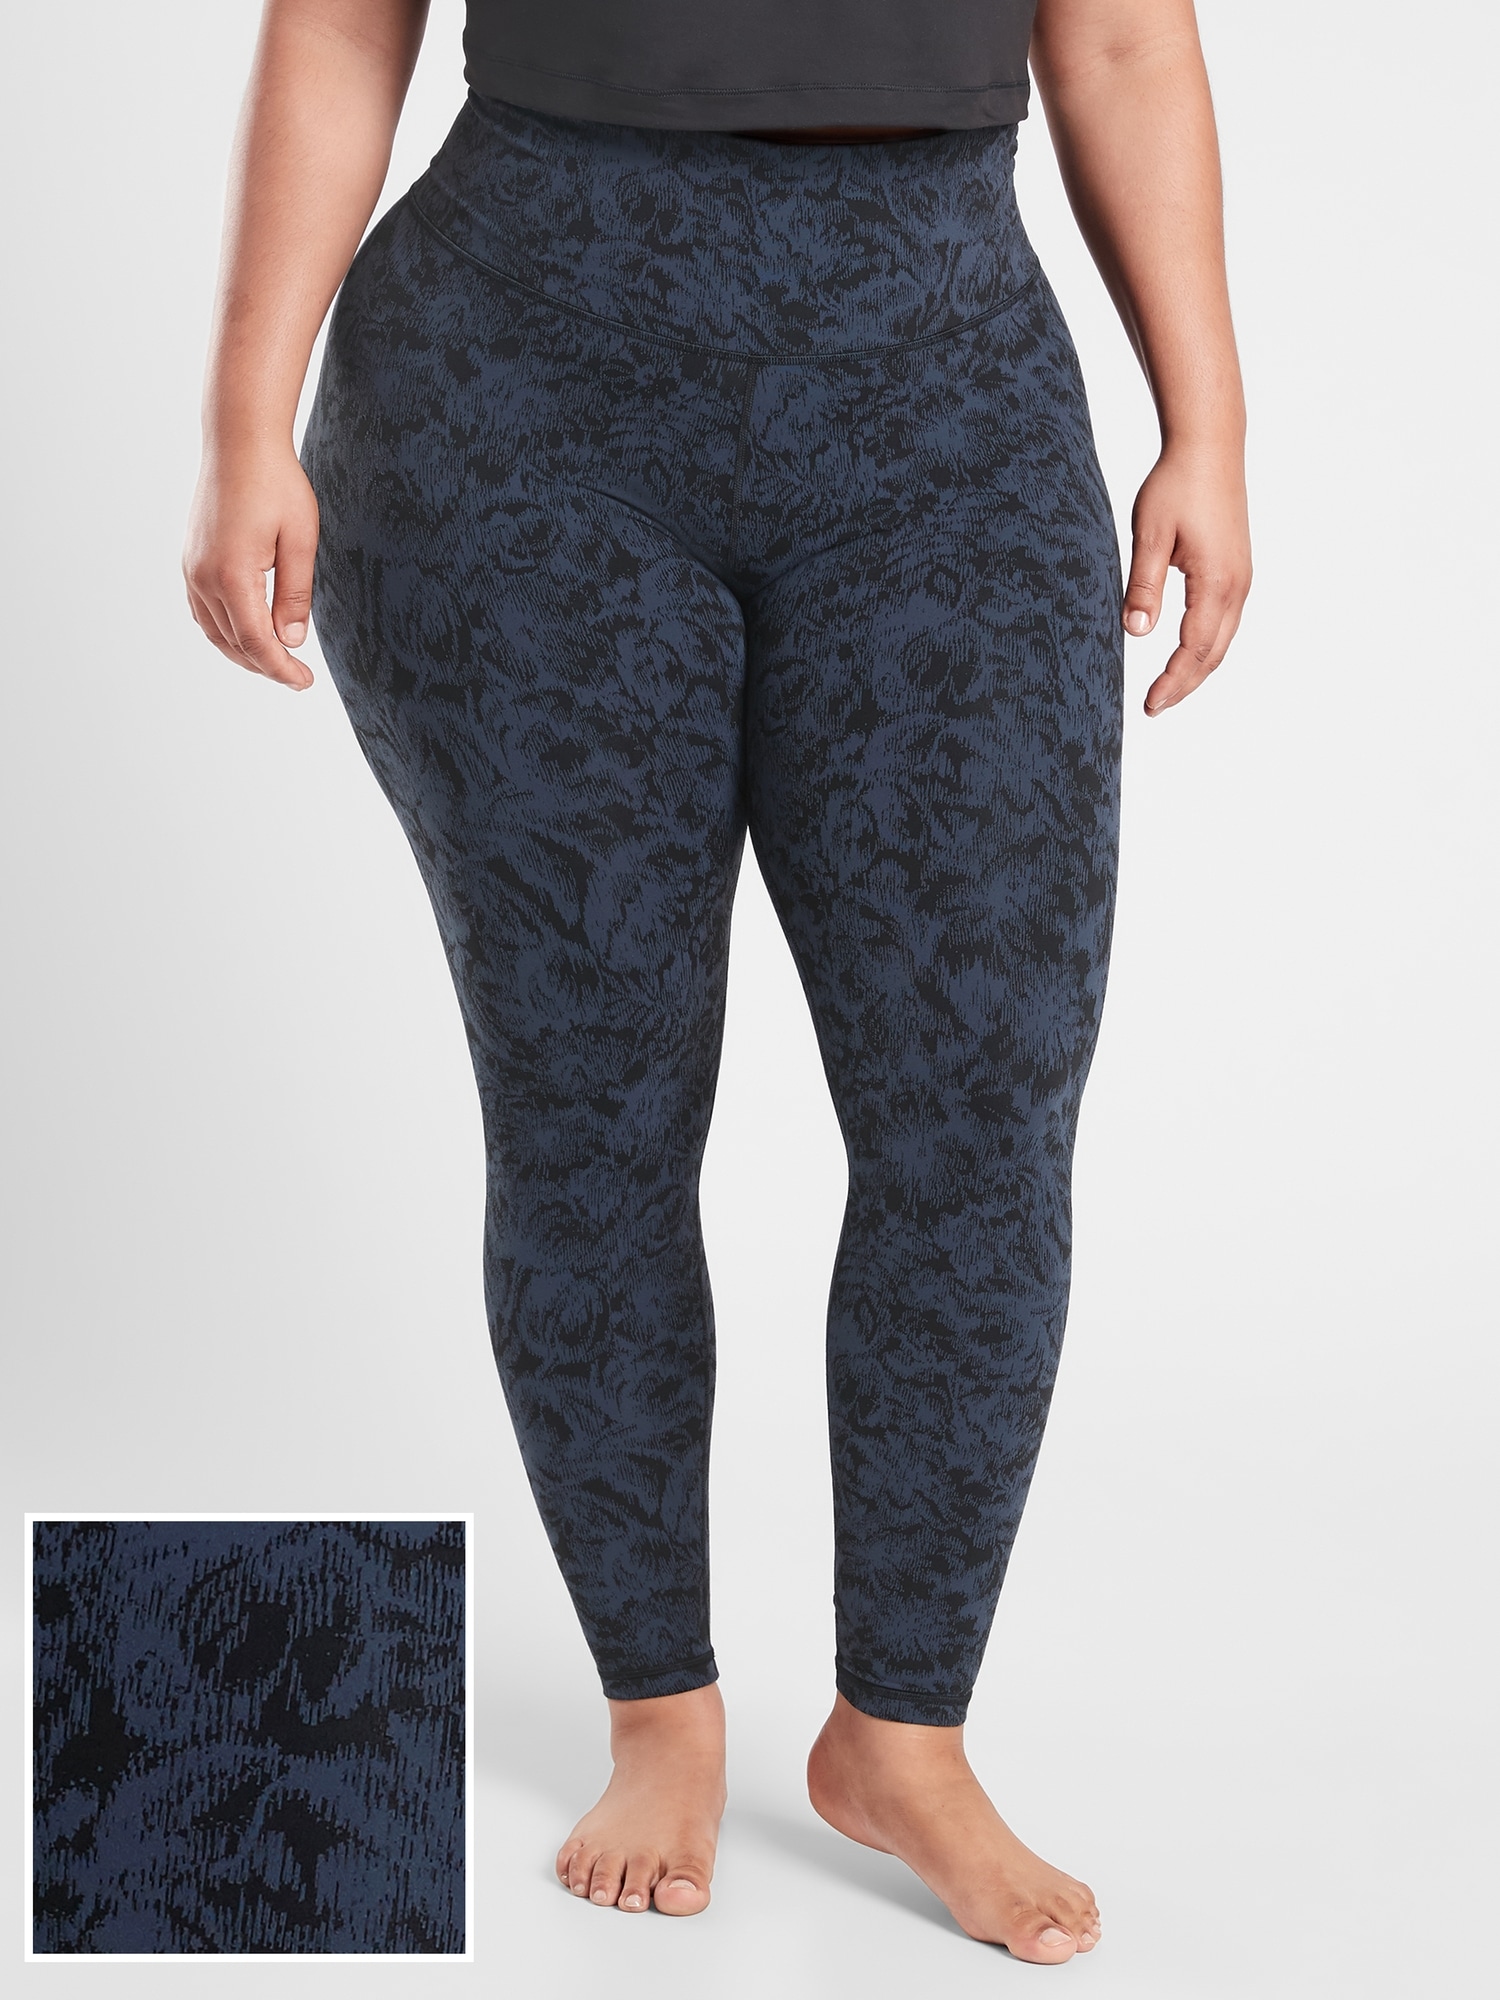 ATHLETA Elation Textured Tight, Frosted Floral Pink – Activejoyboutique